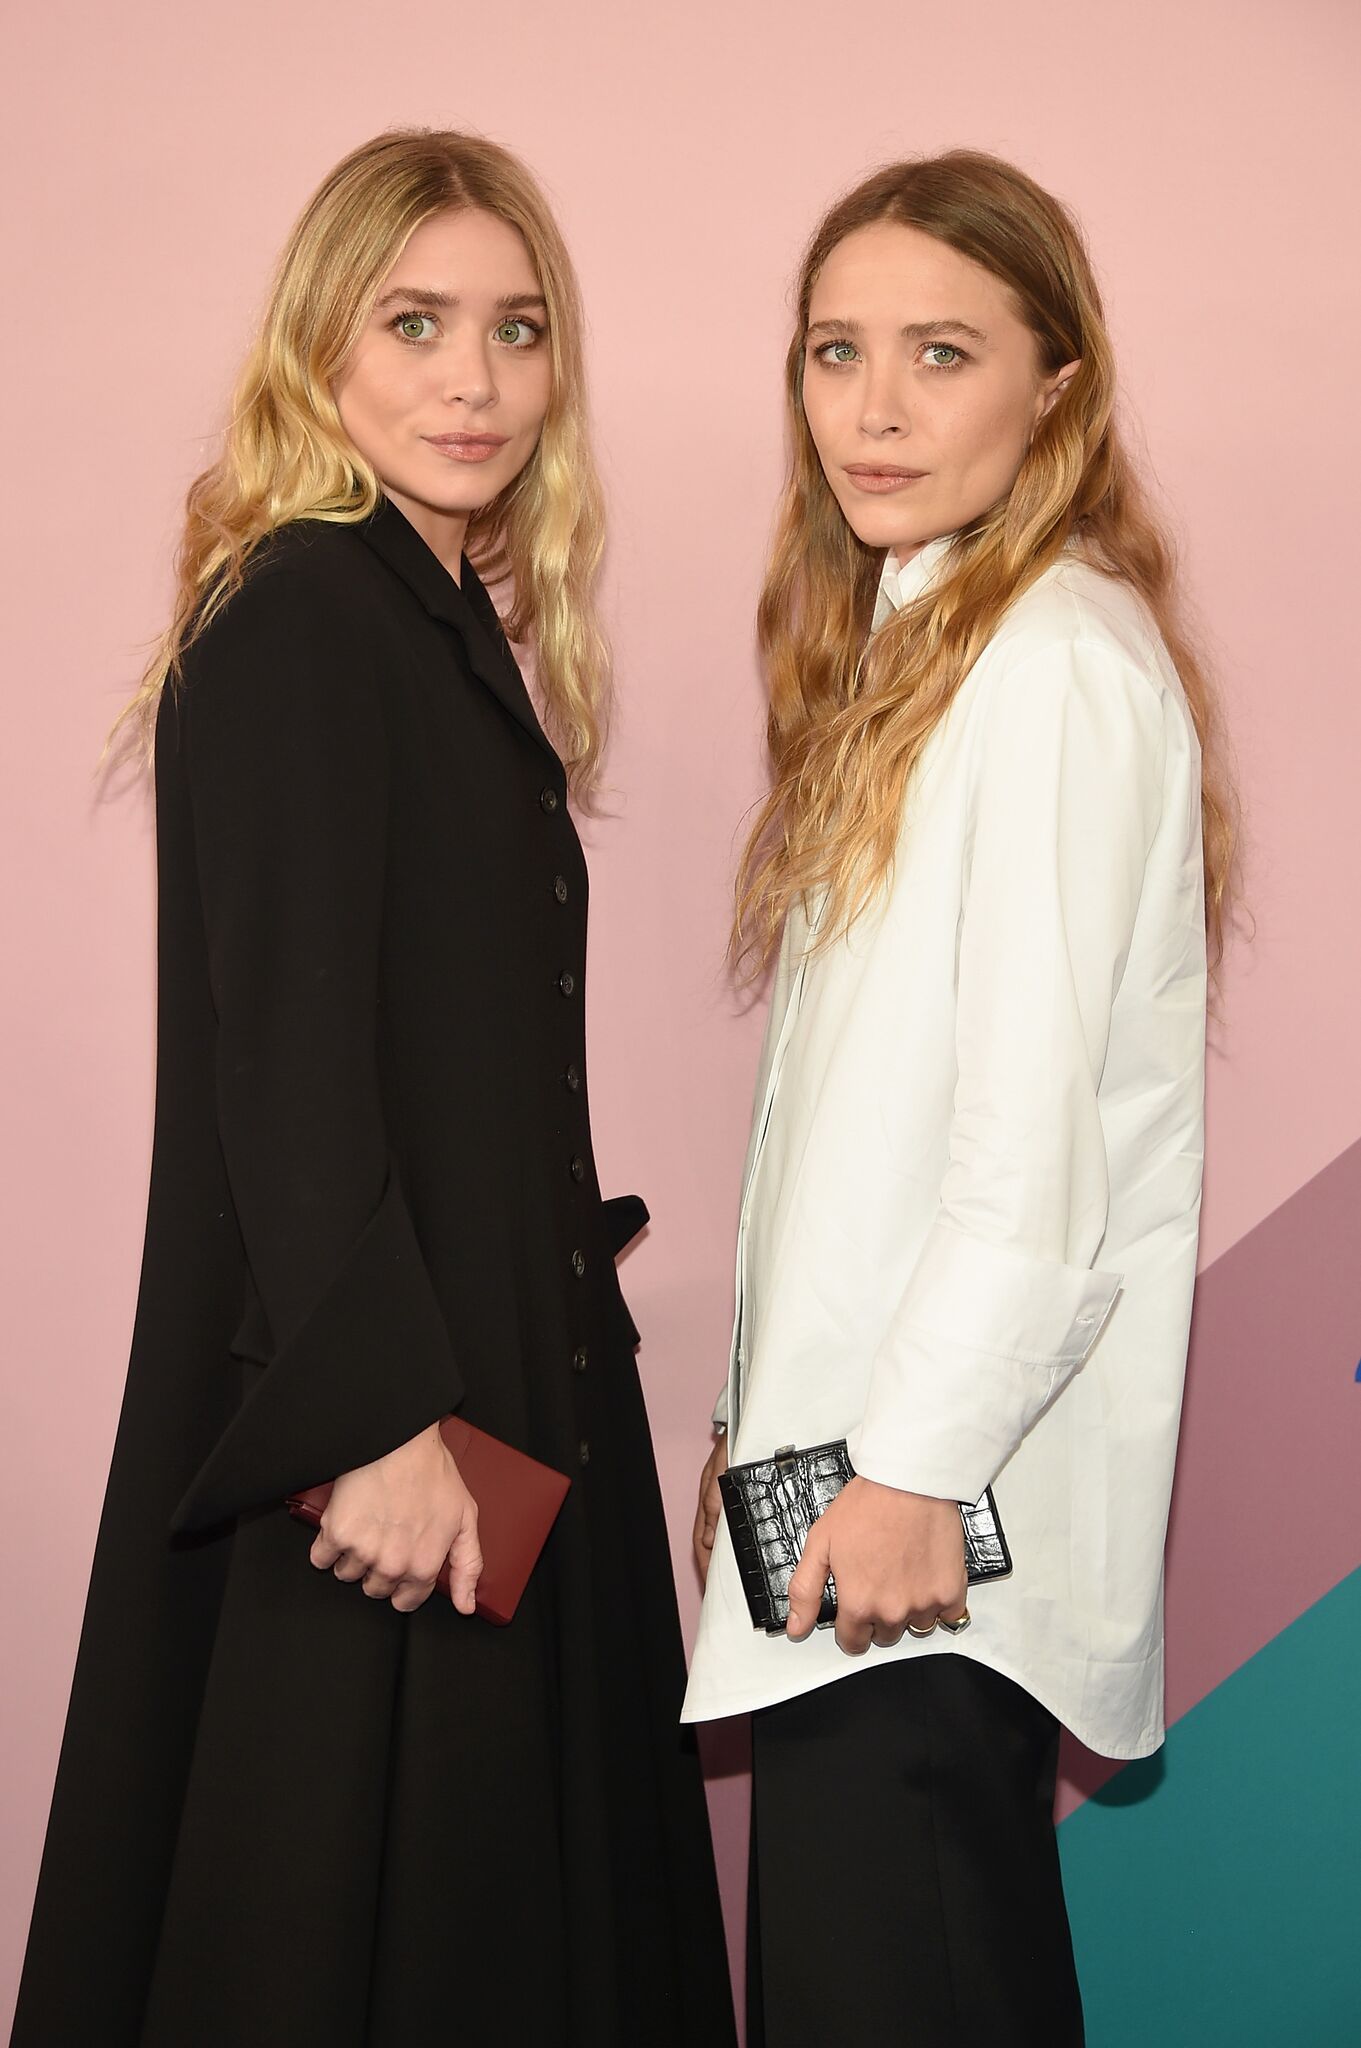 Ashley Olsen and Mary-Kate Olsen attend the 2017 CFDA Fashion Awards at Hammerstein Ballroom  | Getty Images